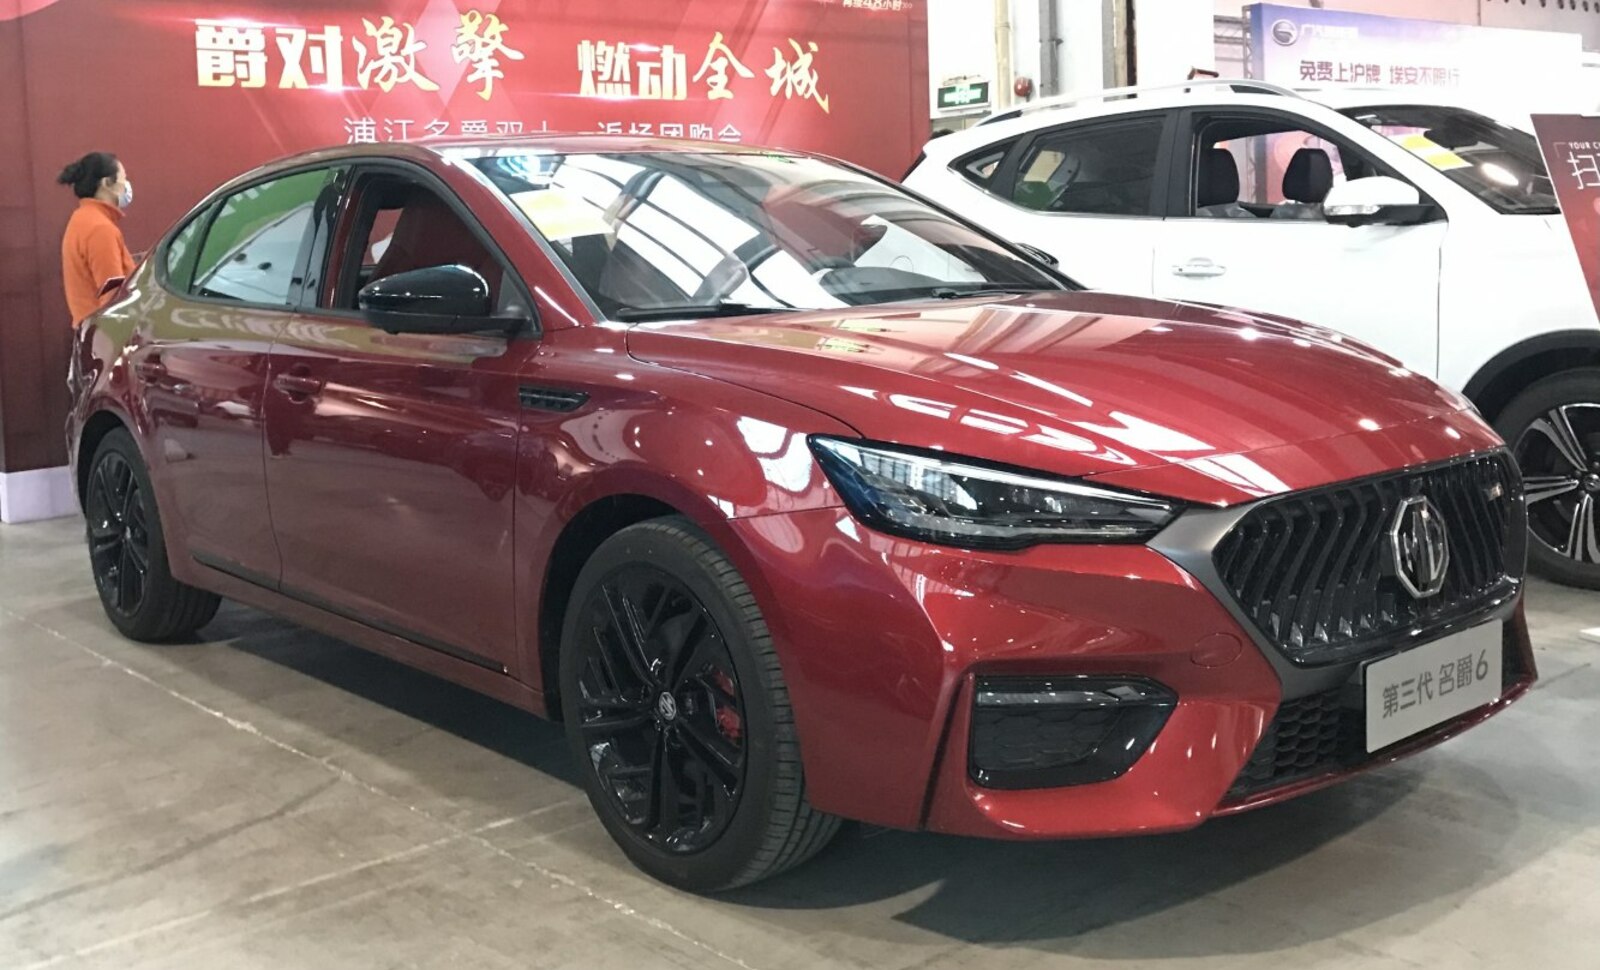 MG MG6 II (facelift 2020) 1.5 50T (305 Hp) PHEV Automatic 2020, 2021